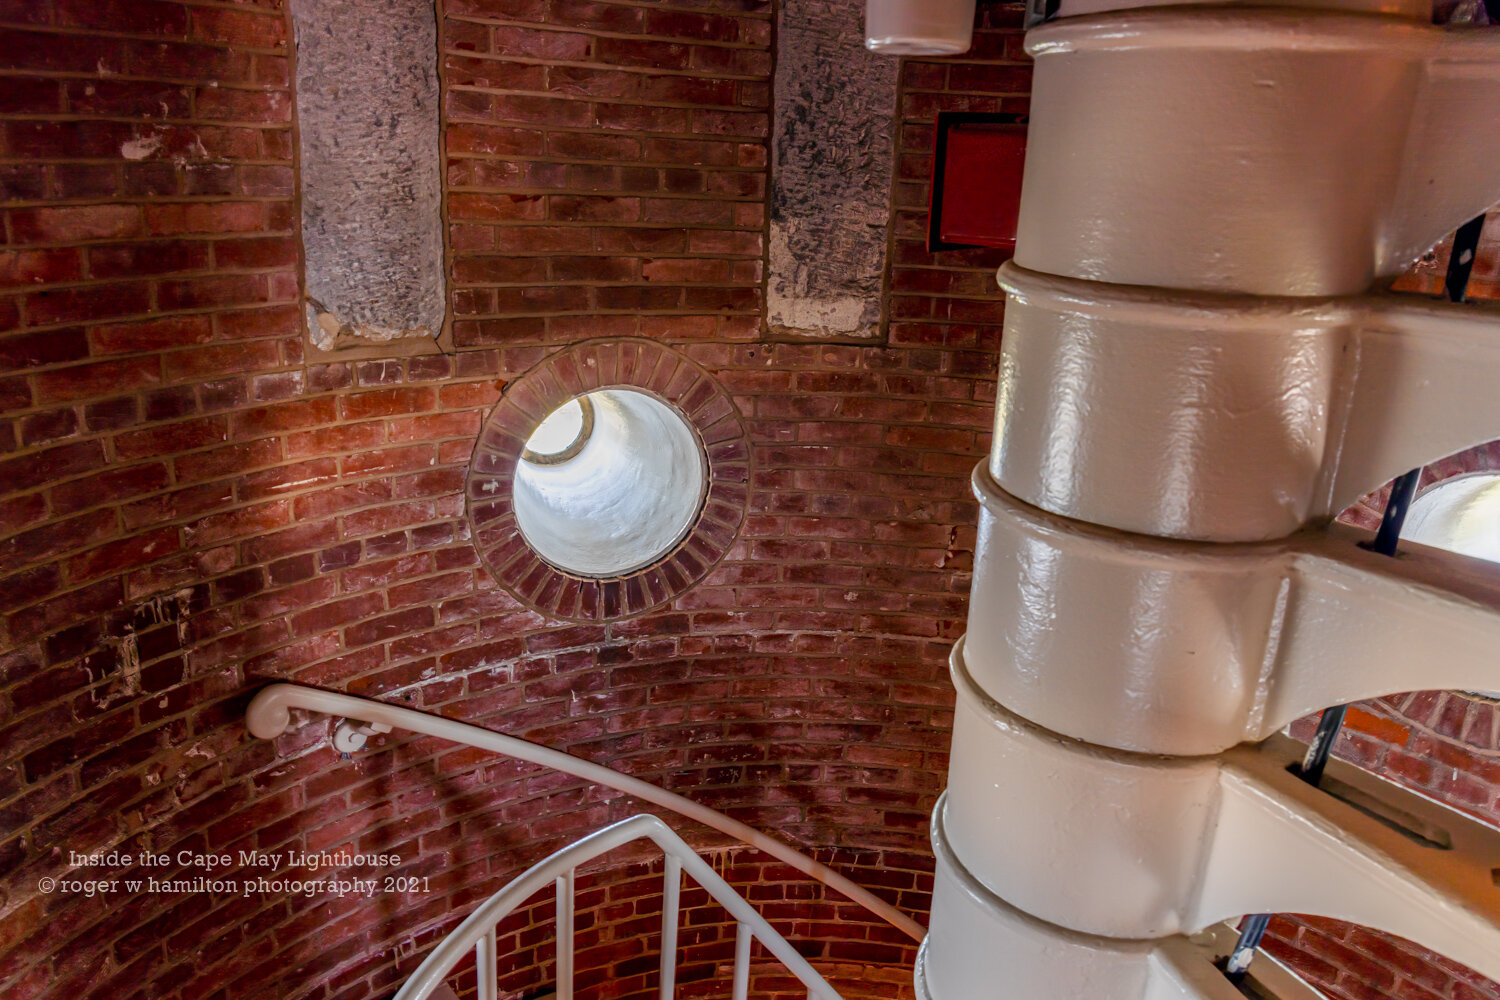 Inside the Cape May Lighthouse